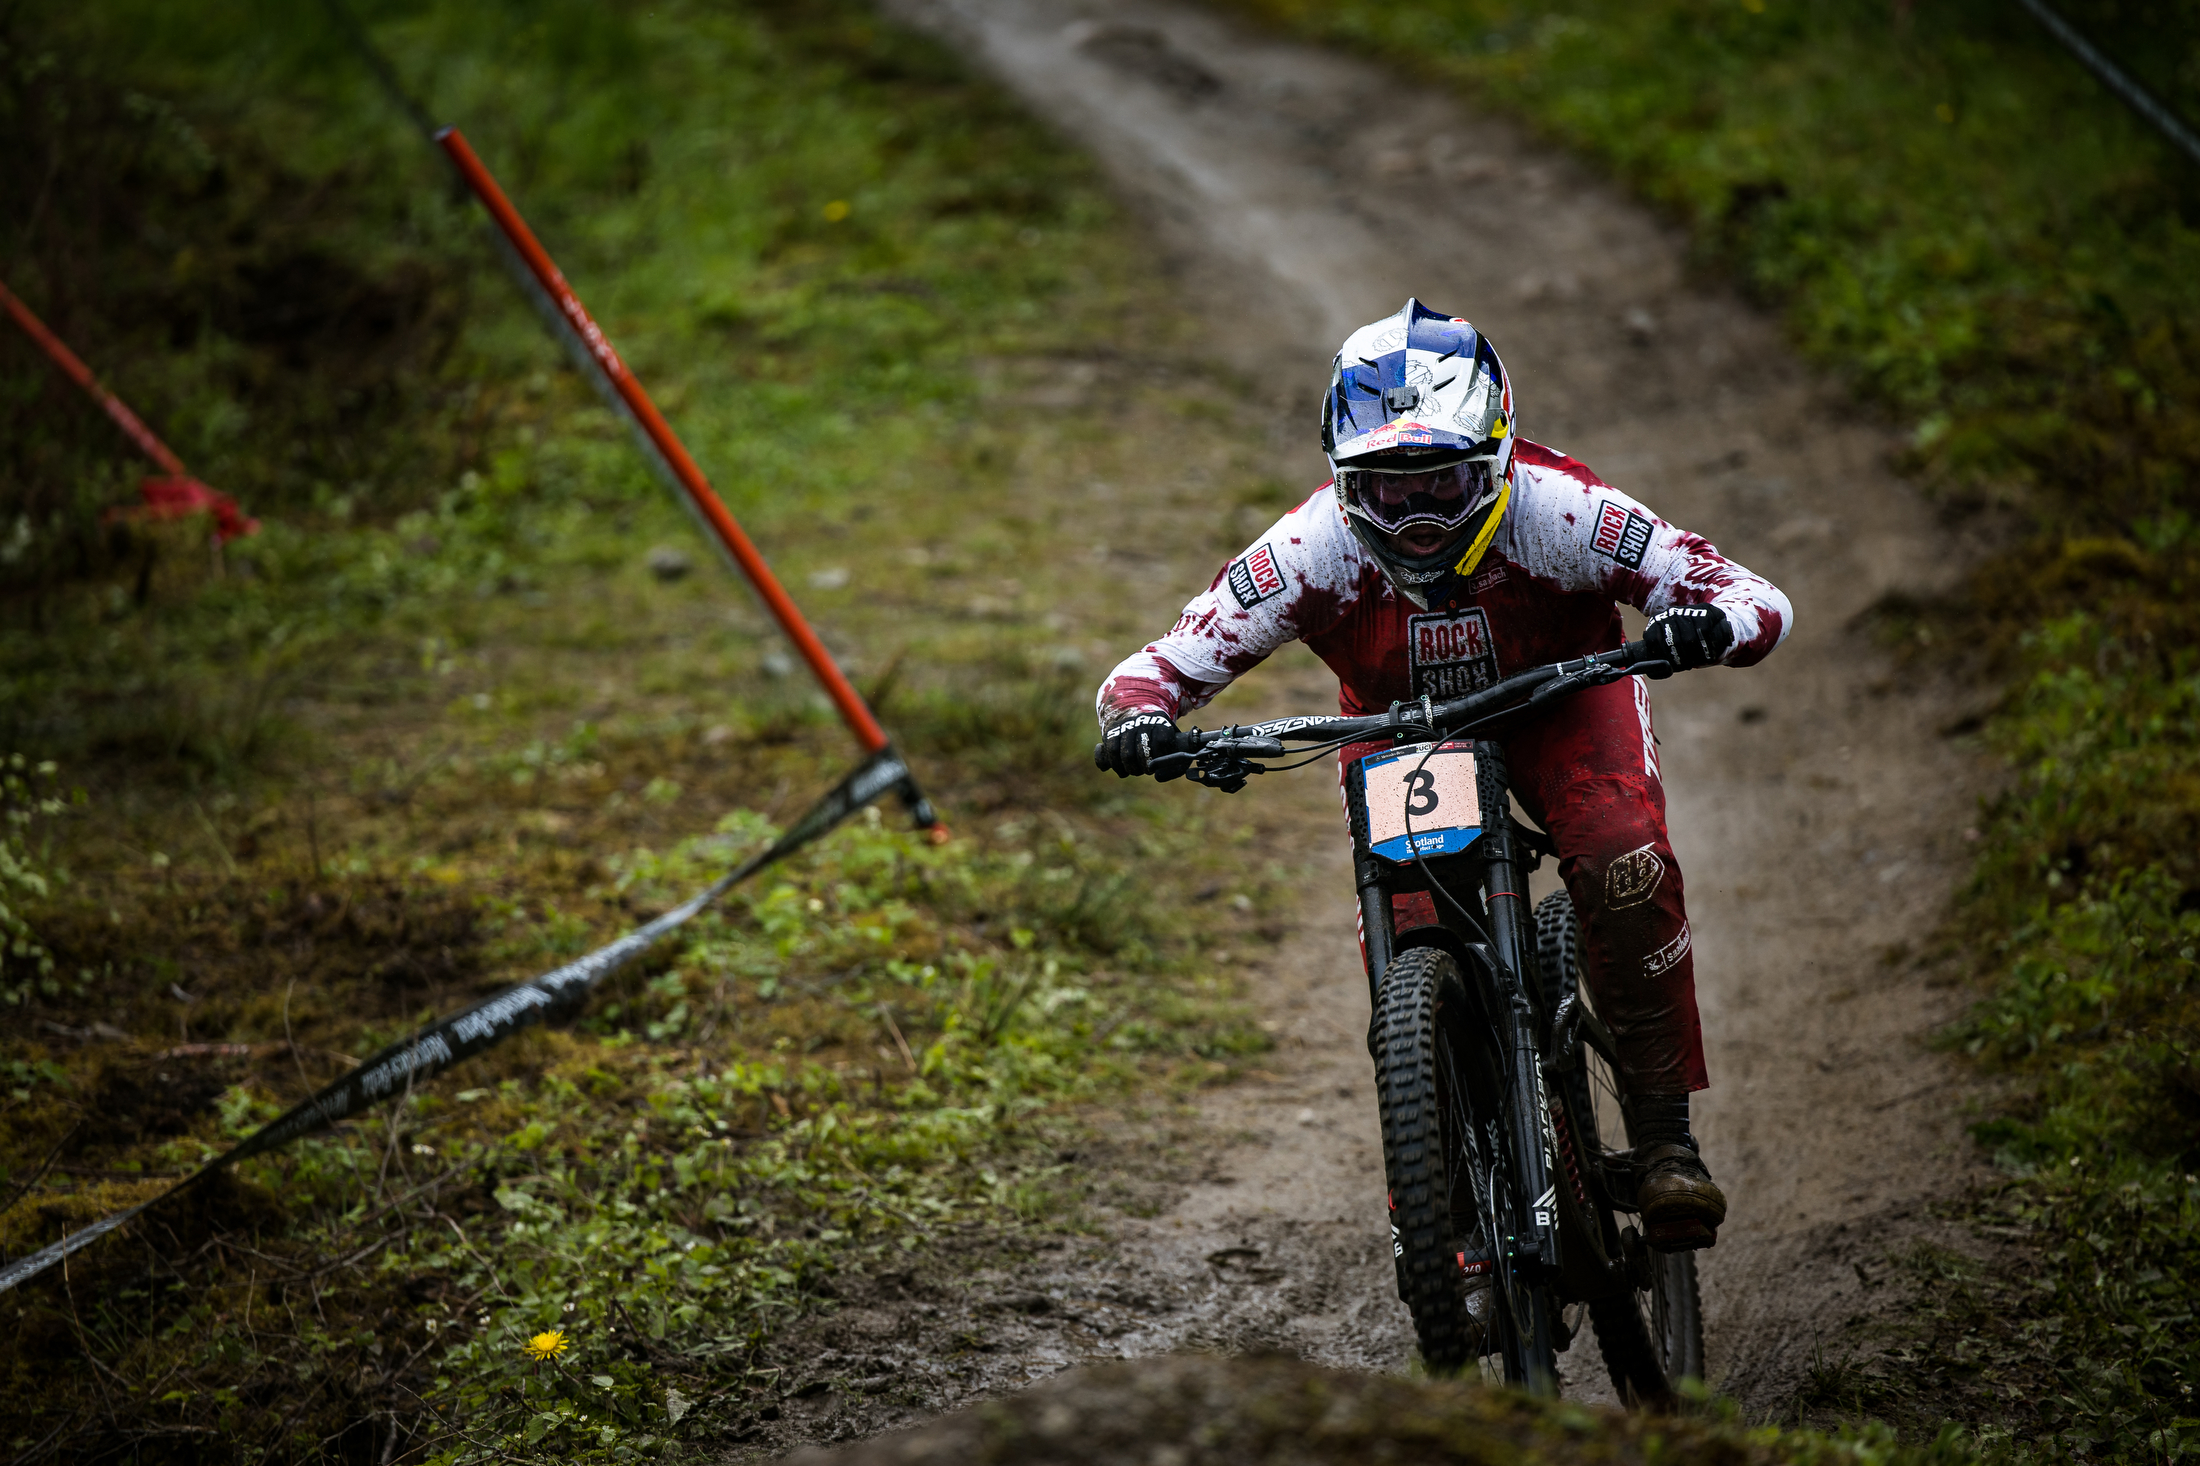 Vali sending it down the Fort William World Cup track.